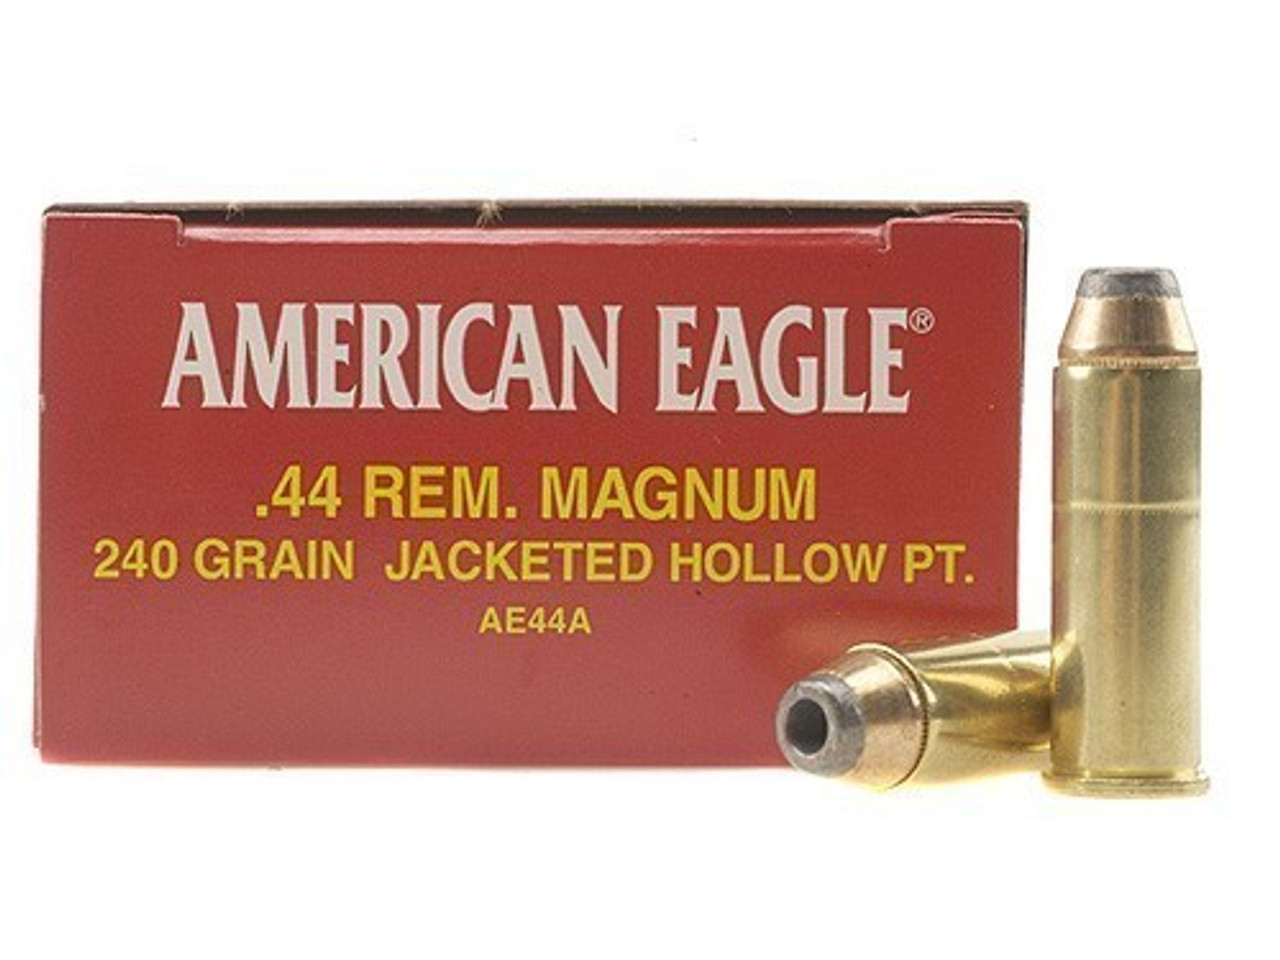 American Eagle 44 Magnum 240gr Jacketed Hollow Point, Box of 50